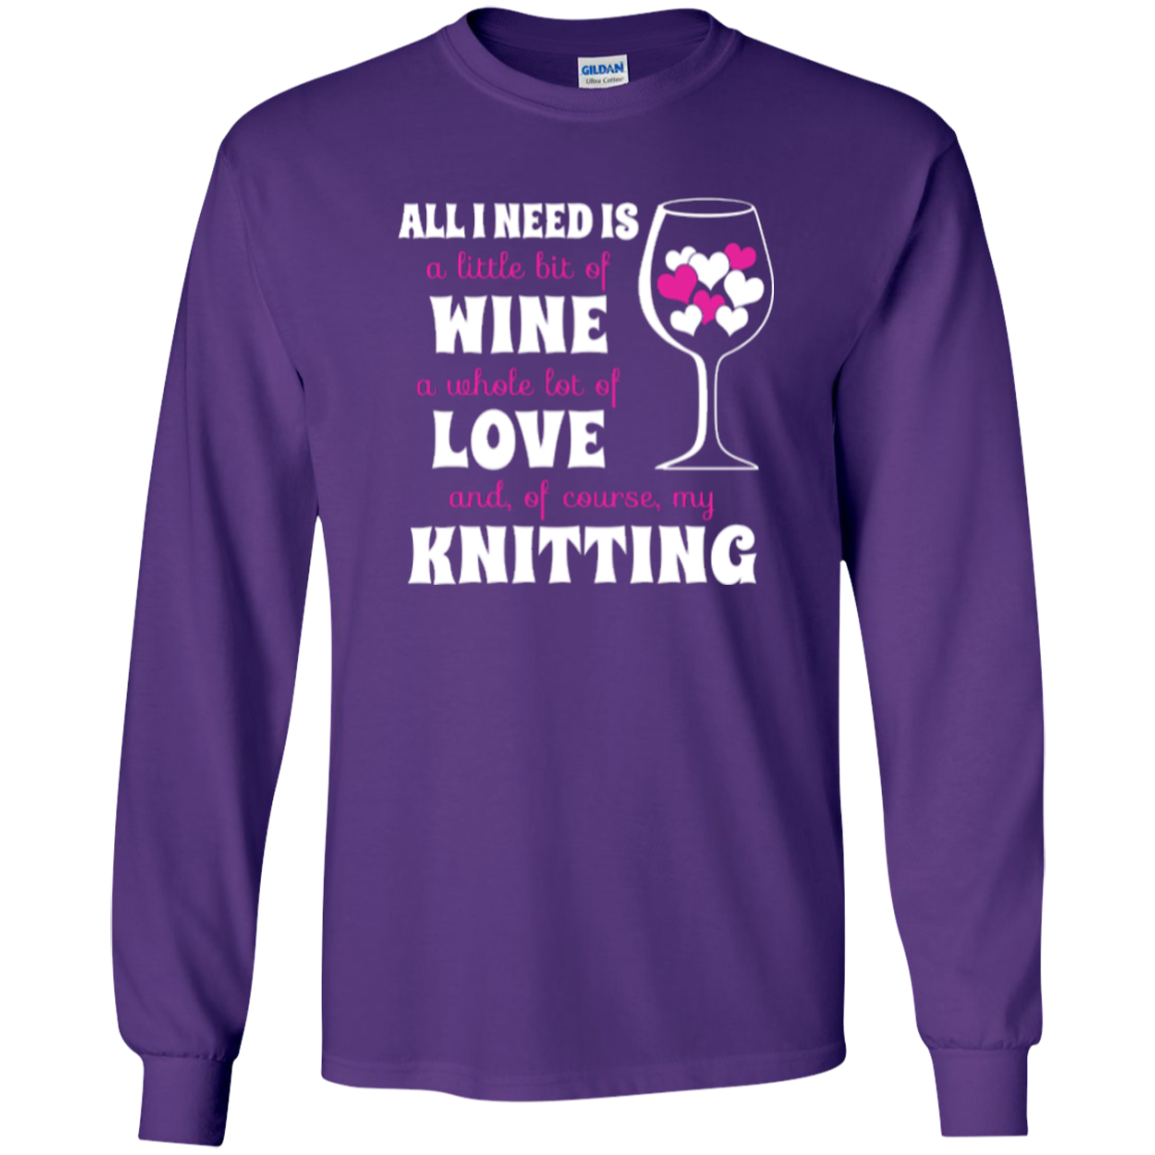 All I Need is Wine-Love-Knitting Long Sleeve Ultra Cotton Tshirt - Crafter4Life - 12